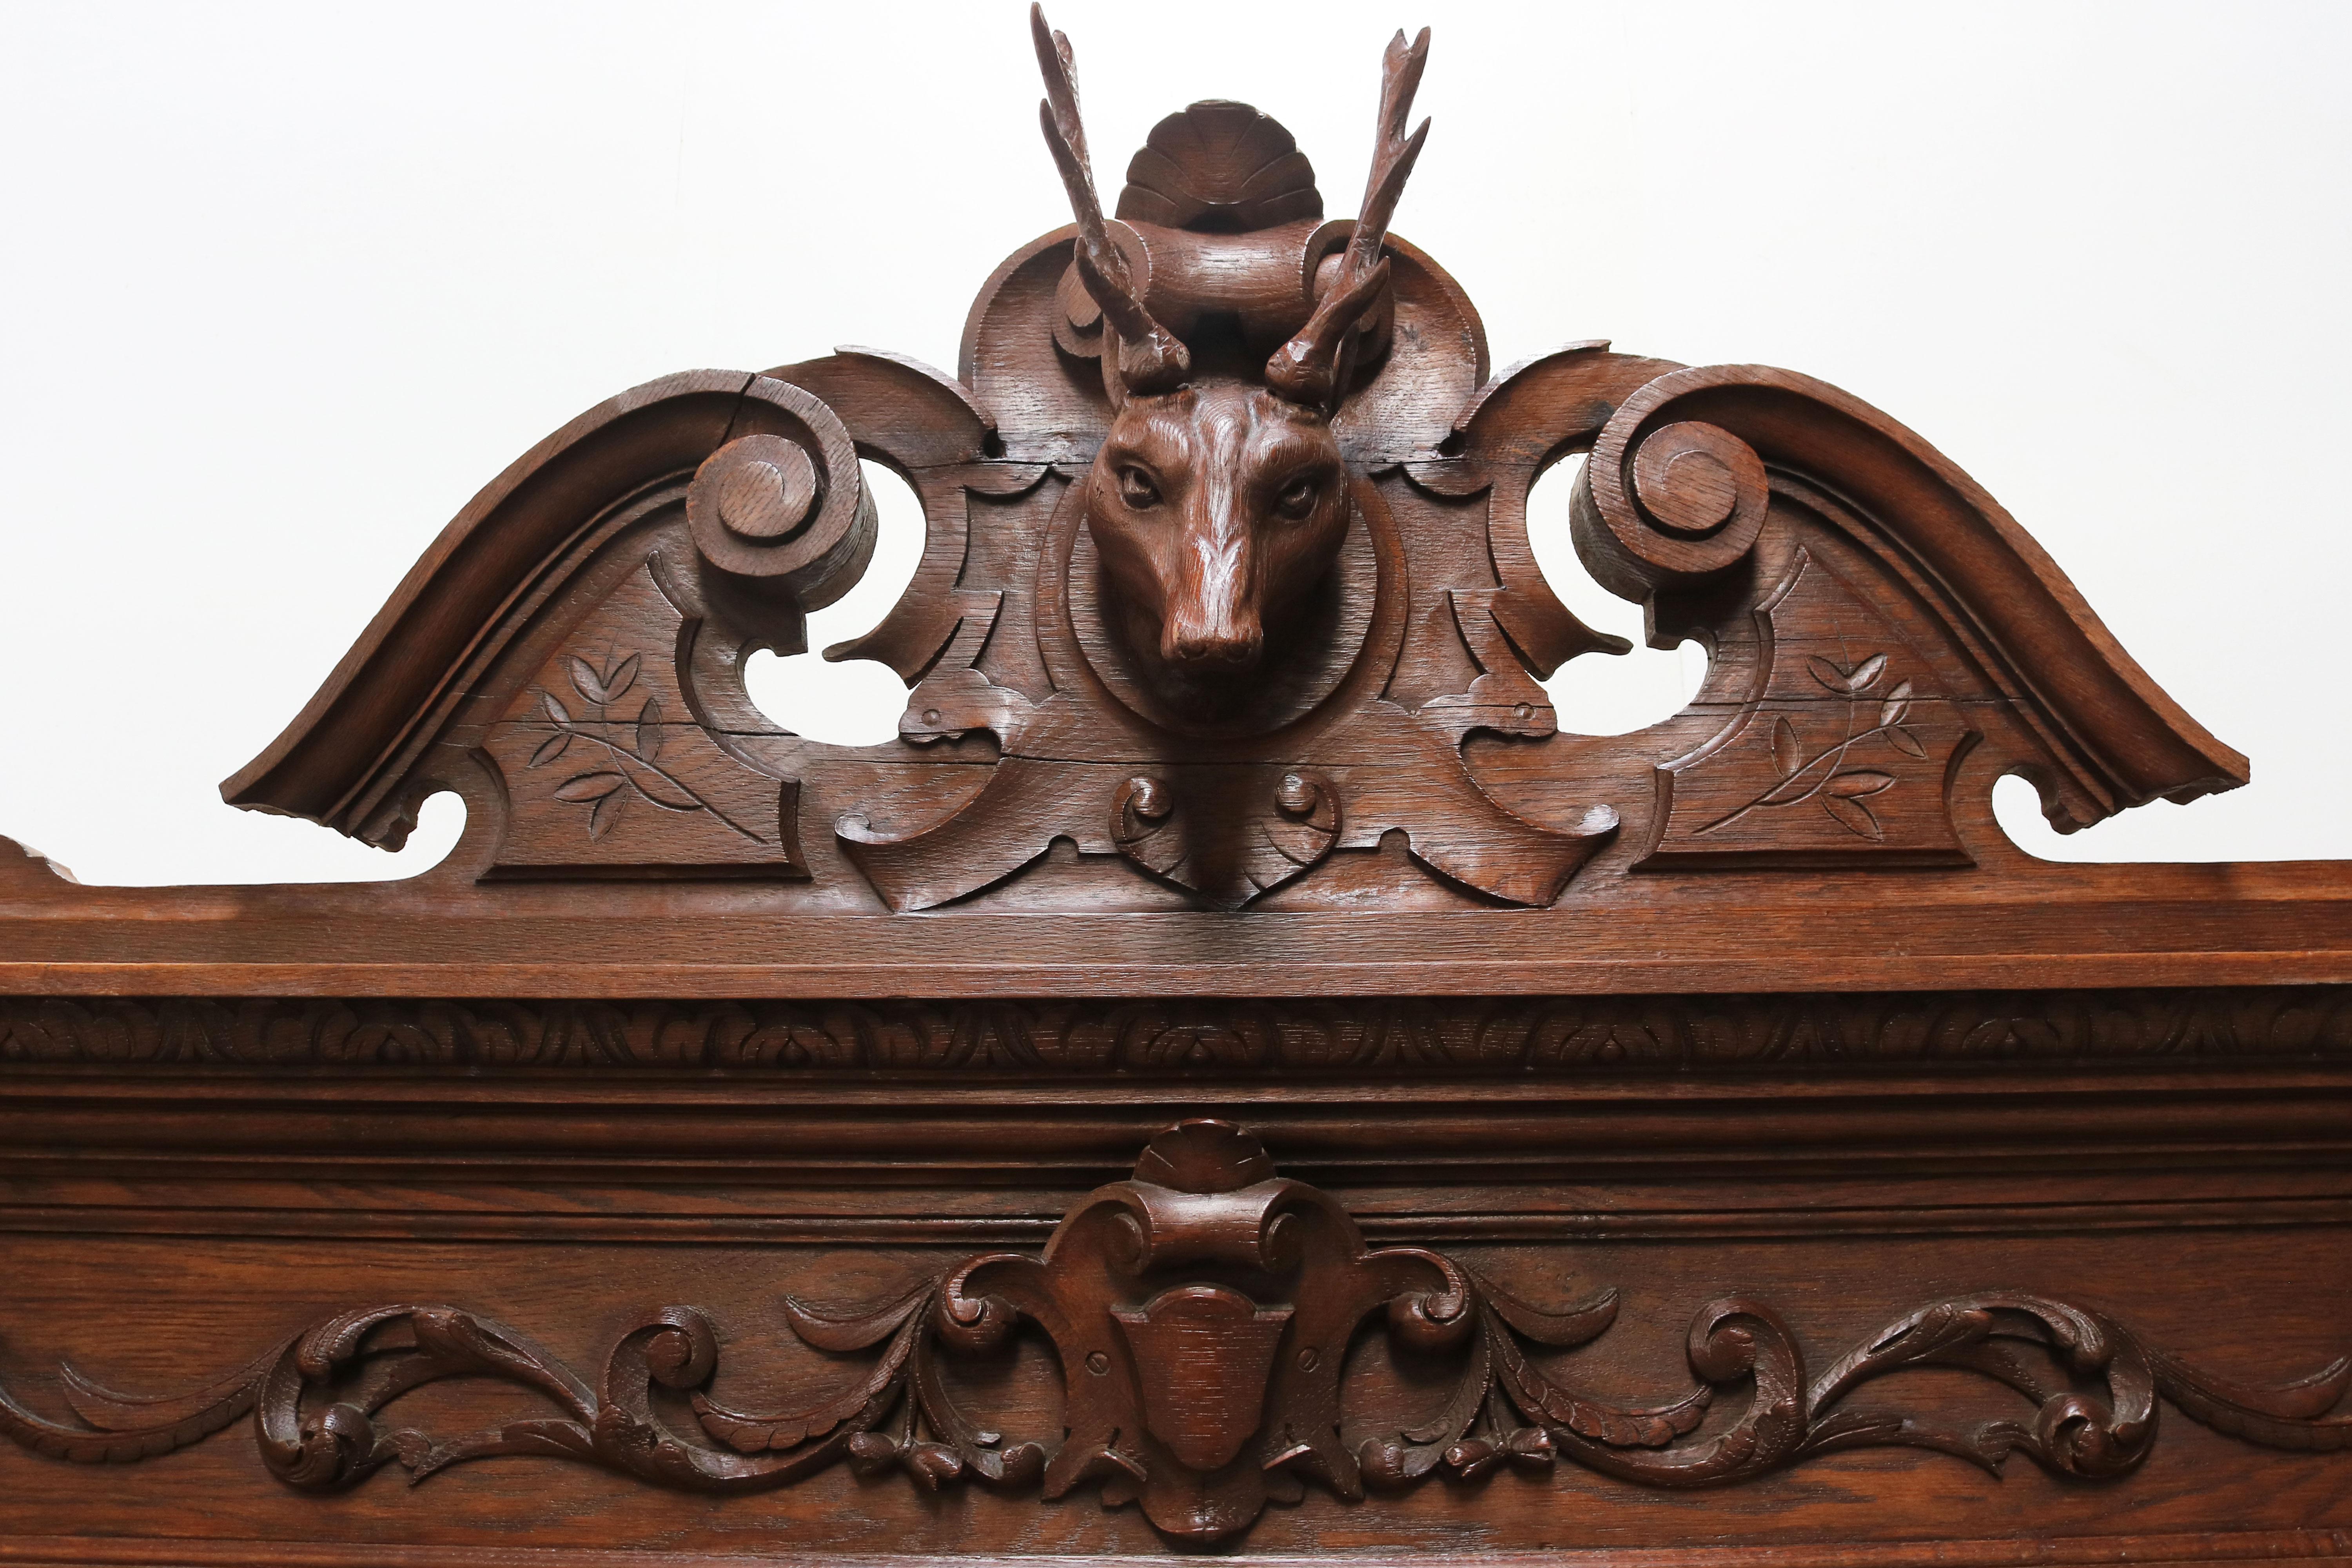 Gorgeous 19th century French hunt style / renaissance revival Cabinet. 
Impressive sculpted Stag on top & four barley twisted columns. 
The cabinet is richly decorated with French hunt / Black Forest style carvings of birds & plants. 
All done in